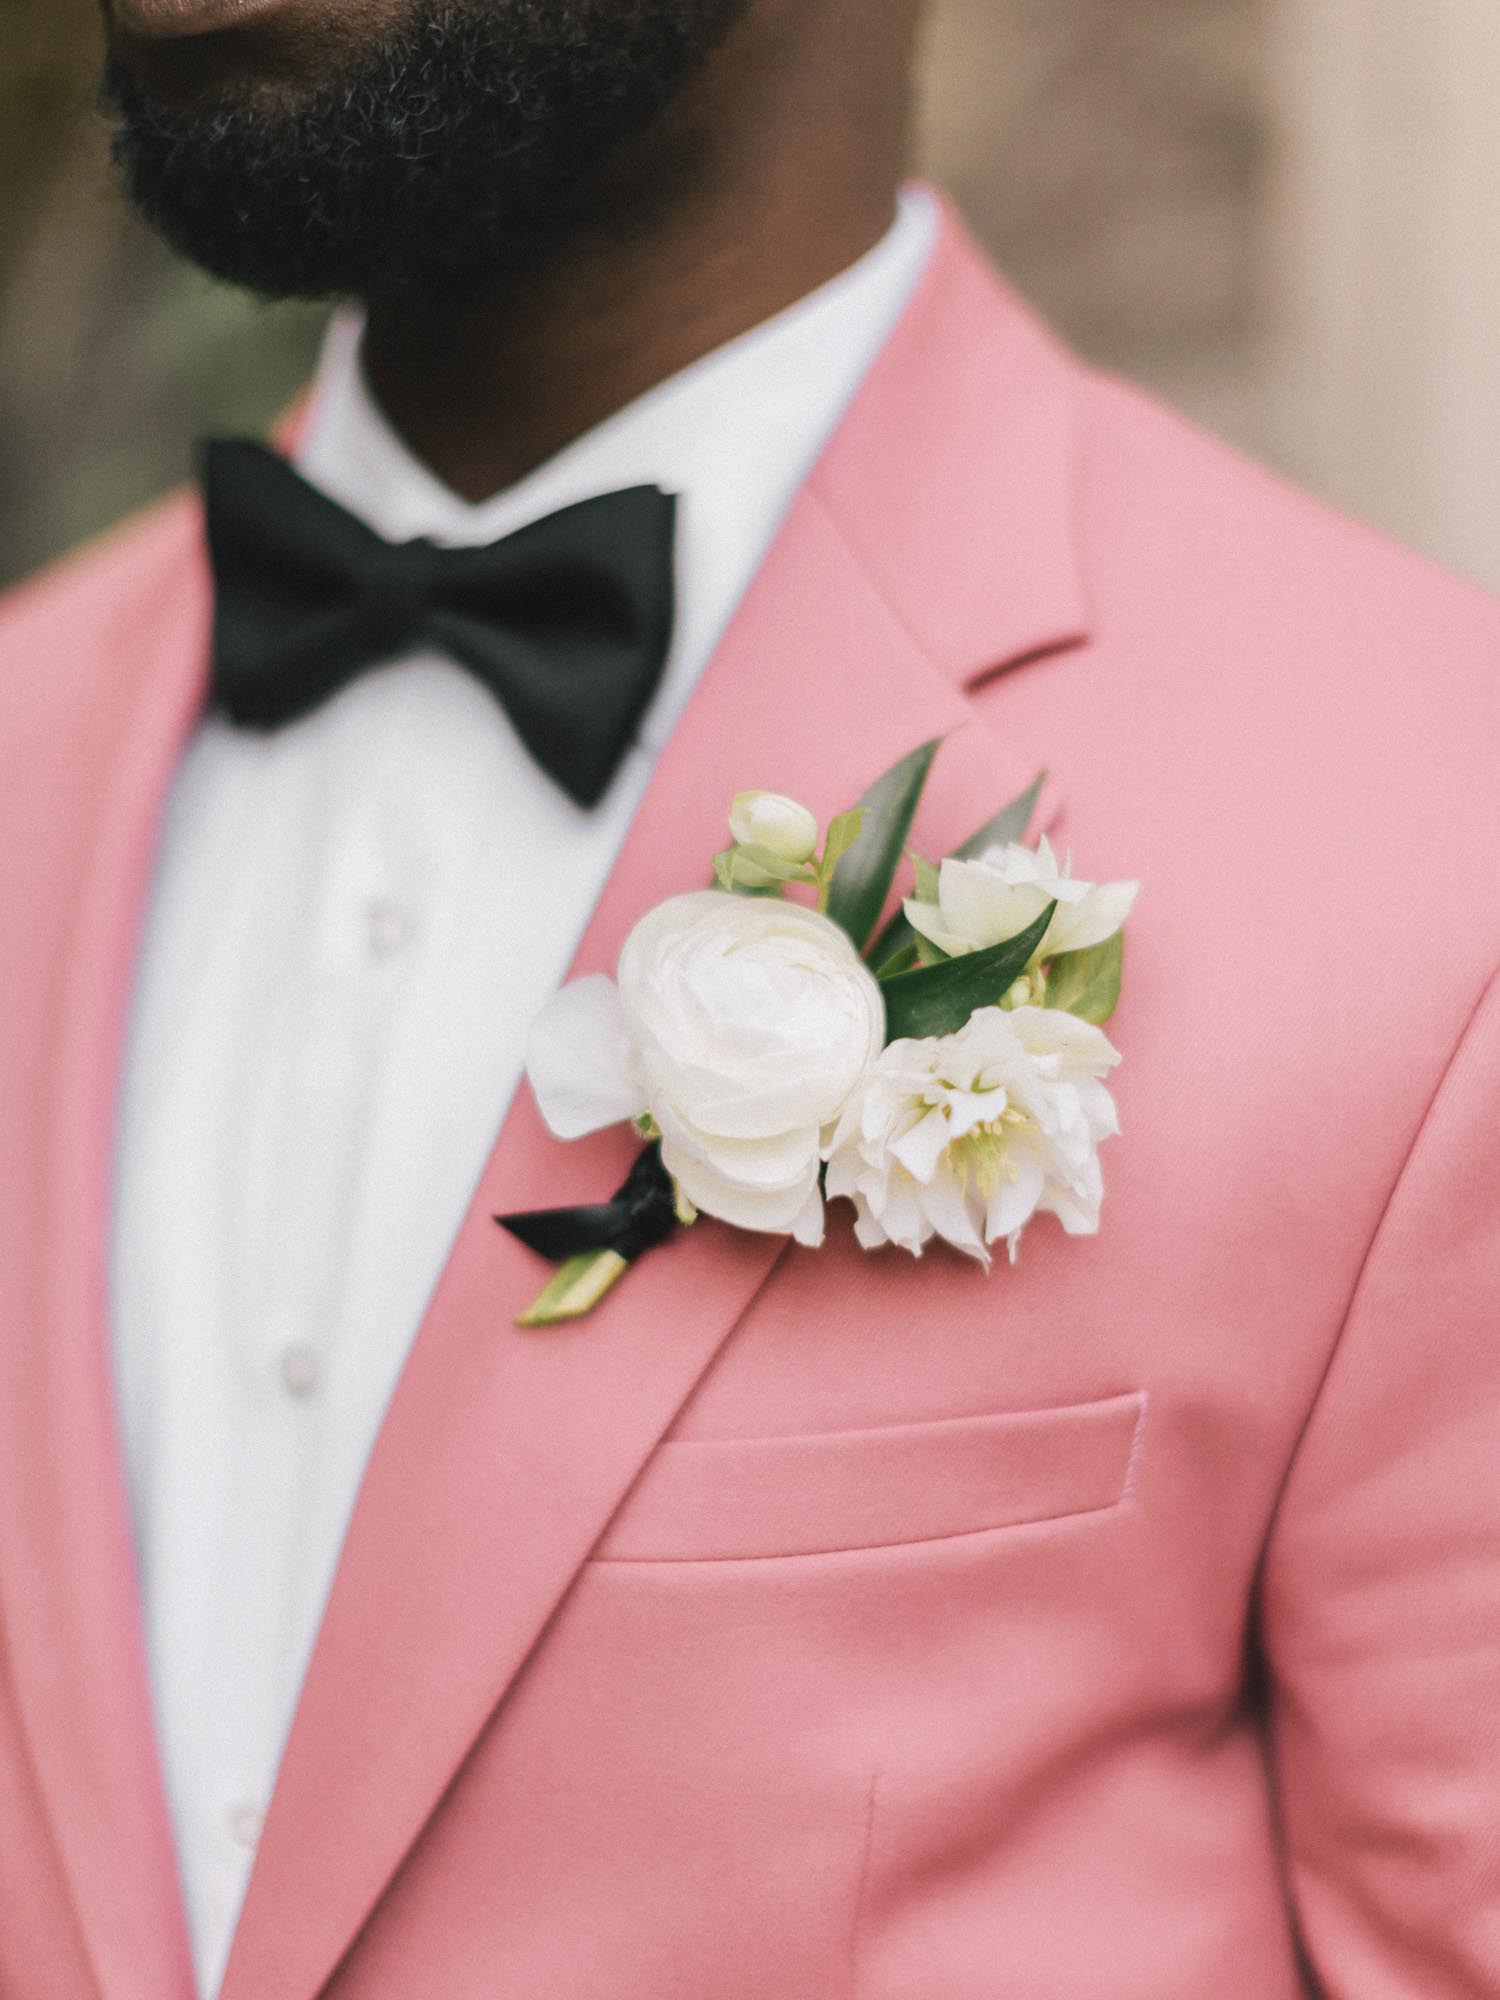 Romantic garden wedding inspiration with black and pink suits | Nadya Vysotskaya Photography | Featured on Equally Wed, the leading LGBTQ+ wedding magazine